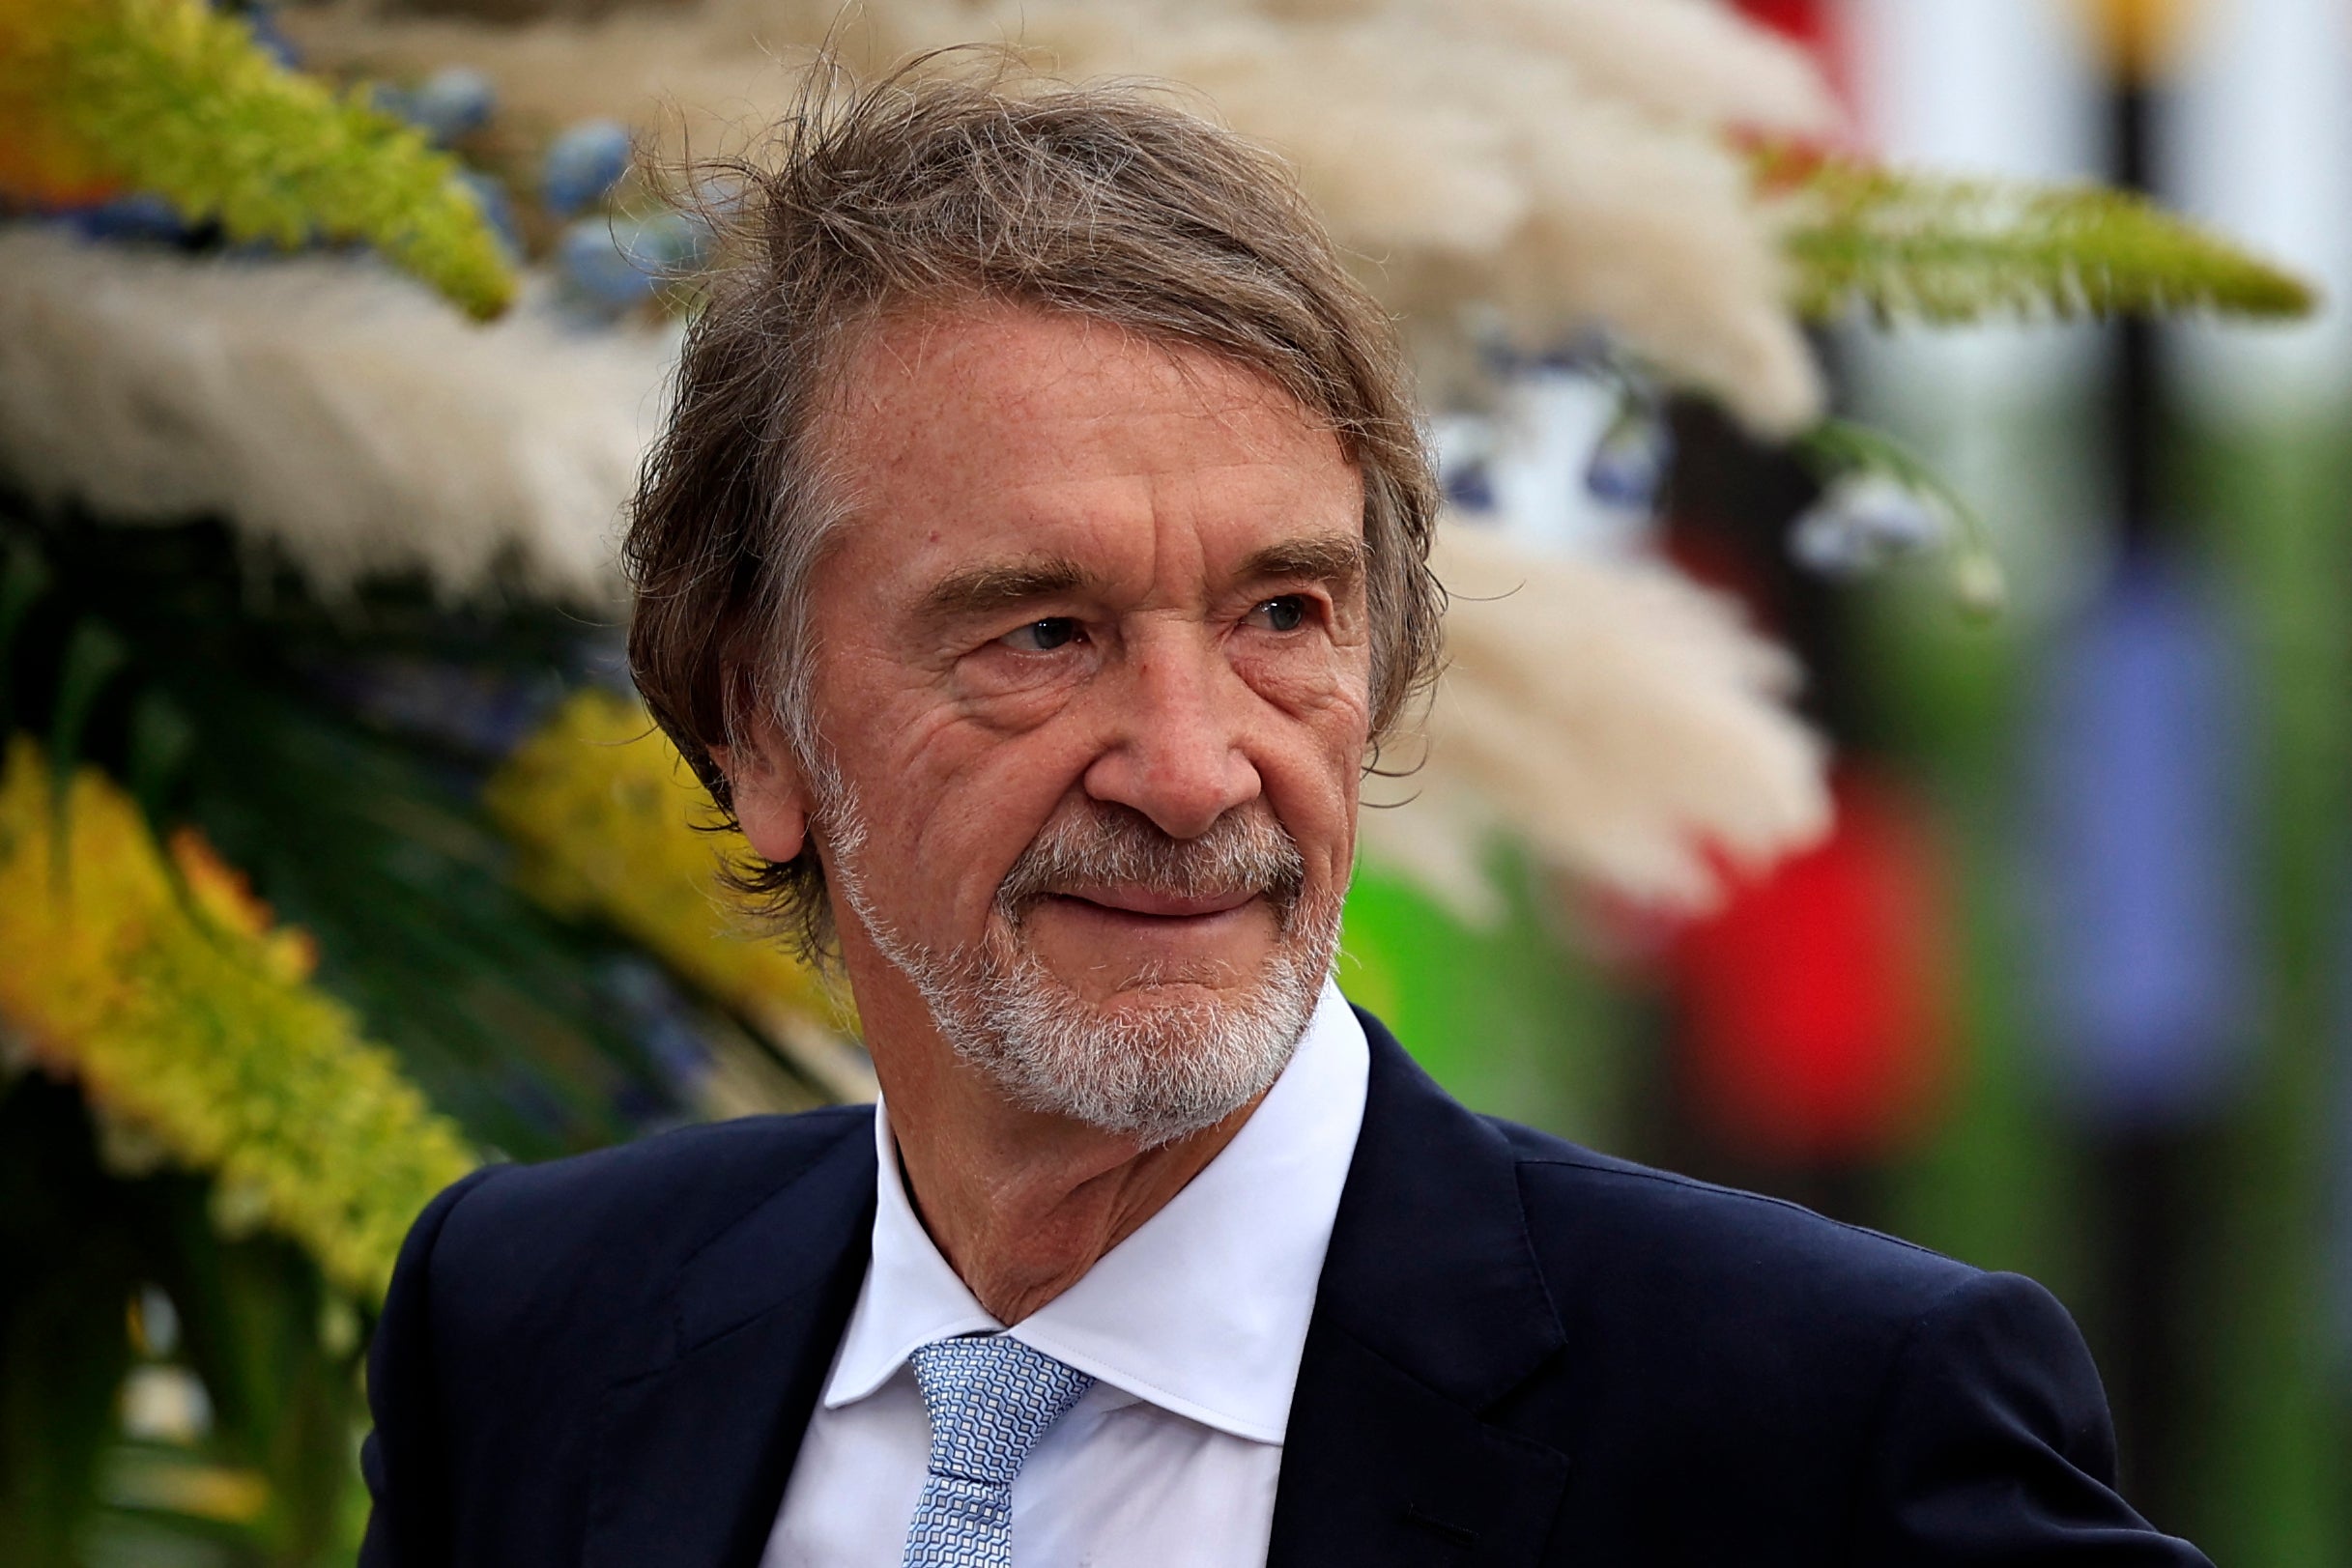 Sir Jim Ratcliffe is in line to purchase 25 per cent of the Premier League club